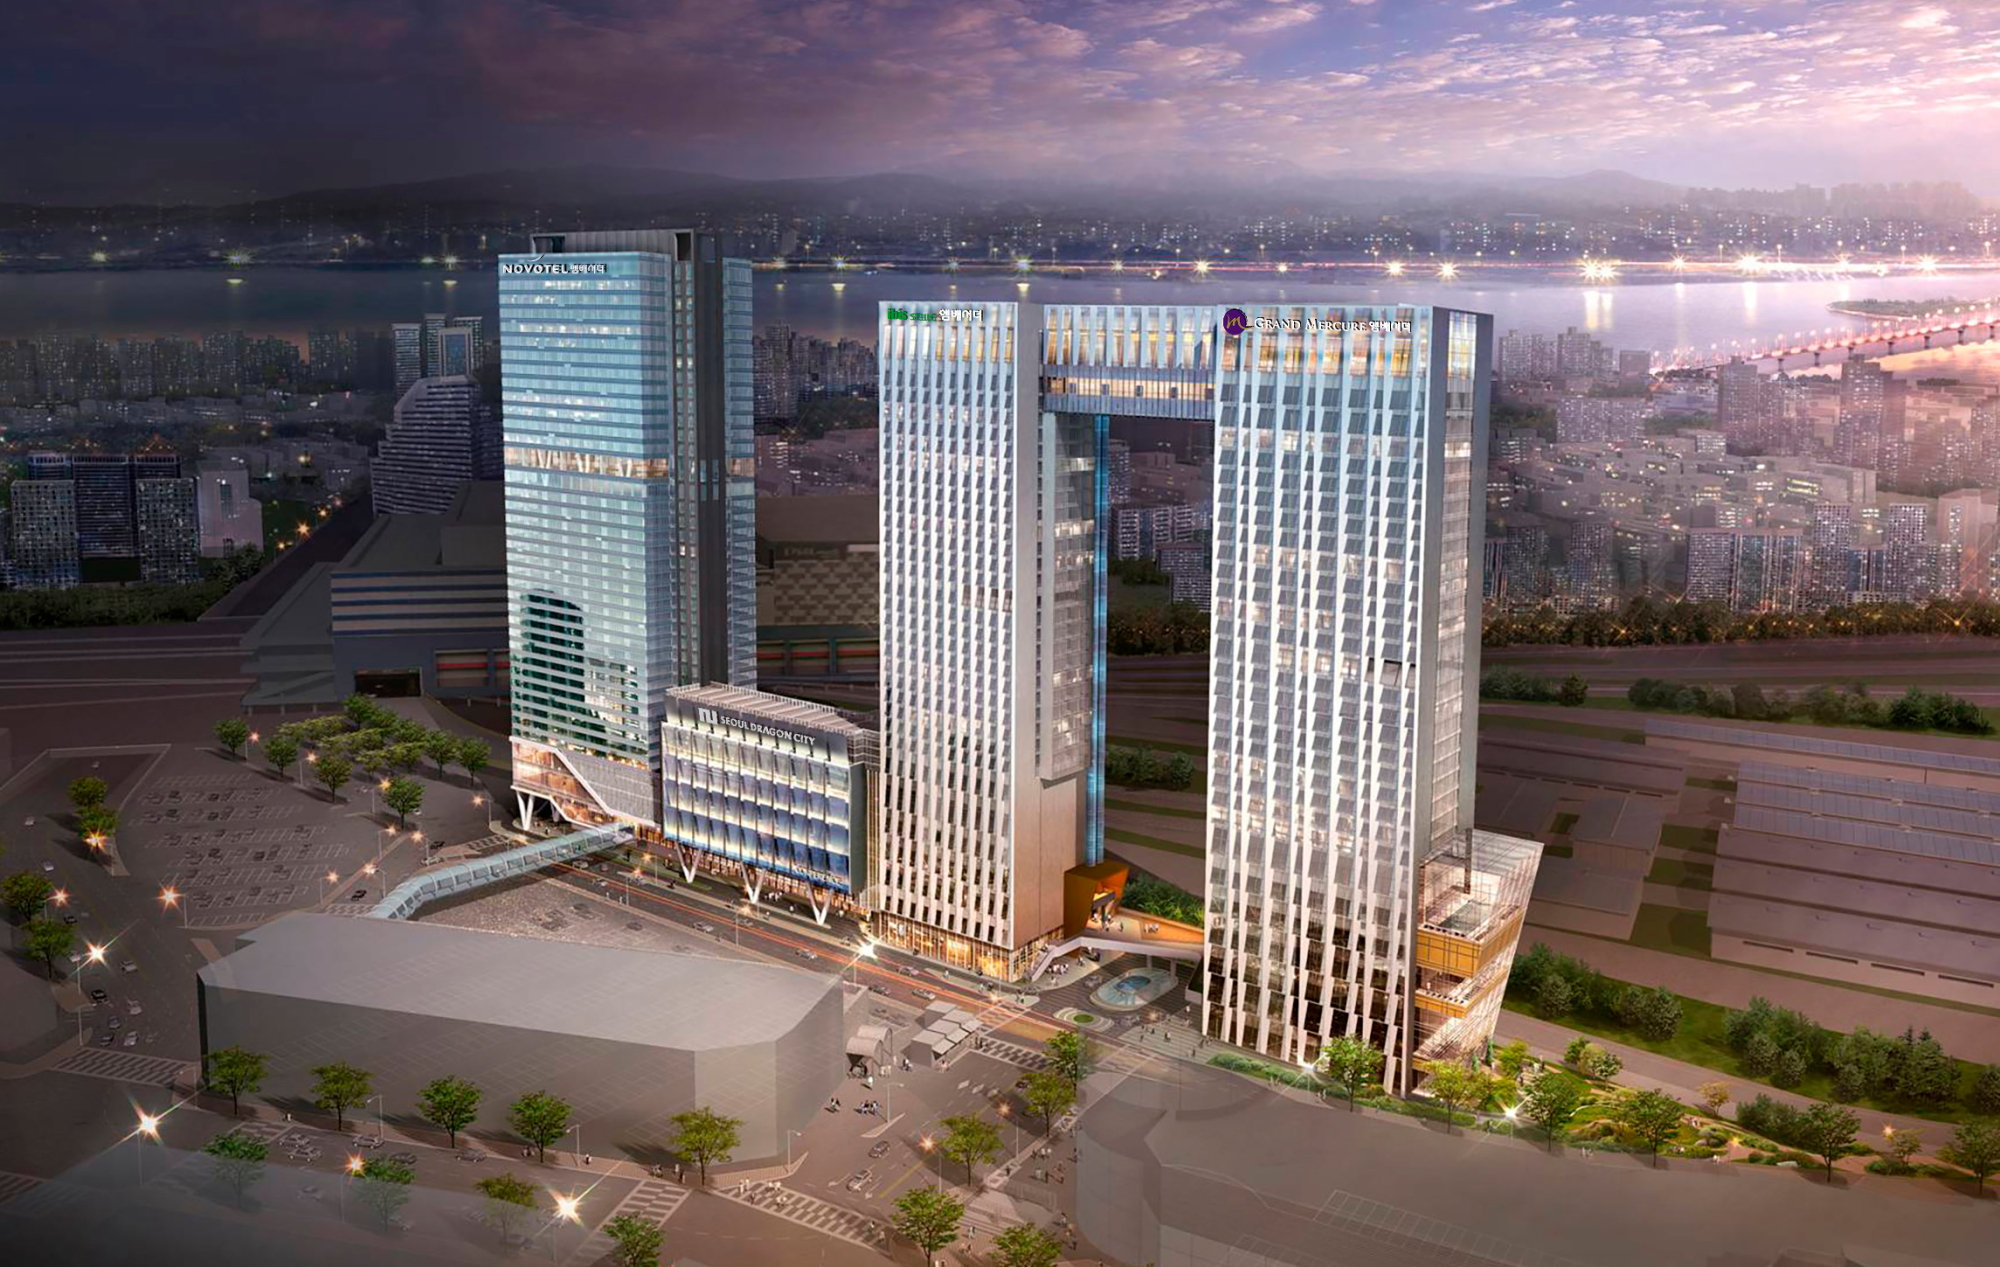 Seoul Dragon City, South Korea’s first ‘lifestyle hotel-plex’, will open on 1 October, featuring four AccorHotels brands, 1,700 rooms, 11 restaurants and bars, 17 meeting rooms, two multi-function grand ballrooms, and four floors of entertainment in a Sky Bridge suspended between two of the towers